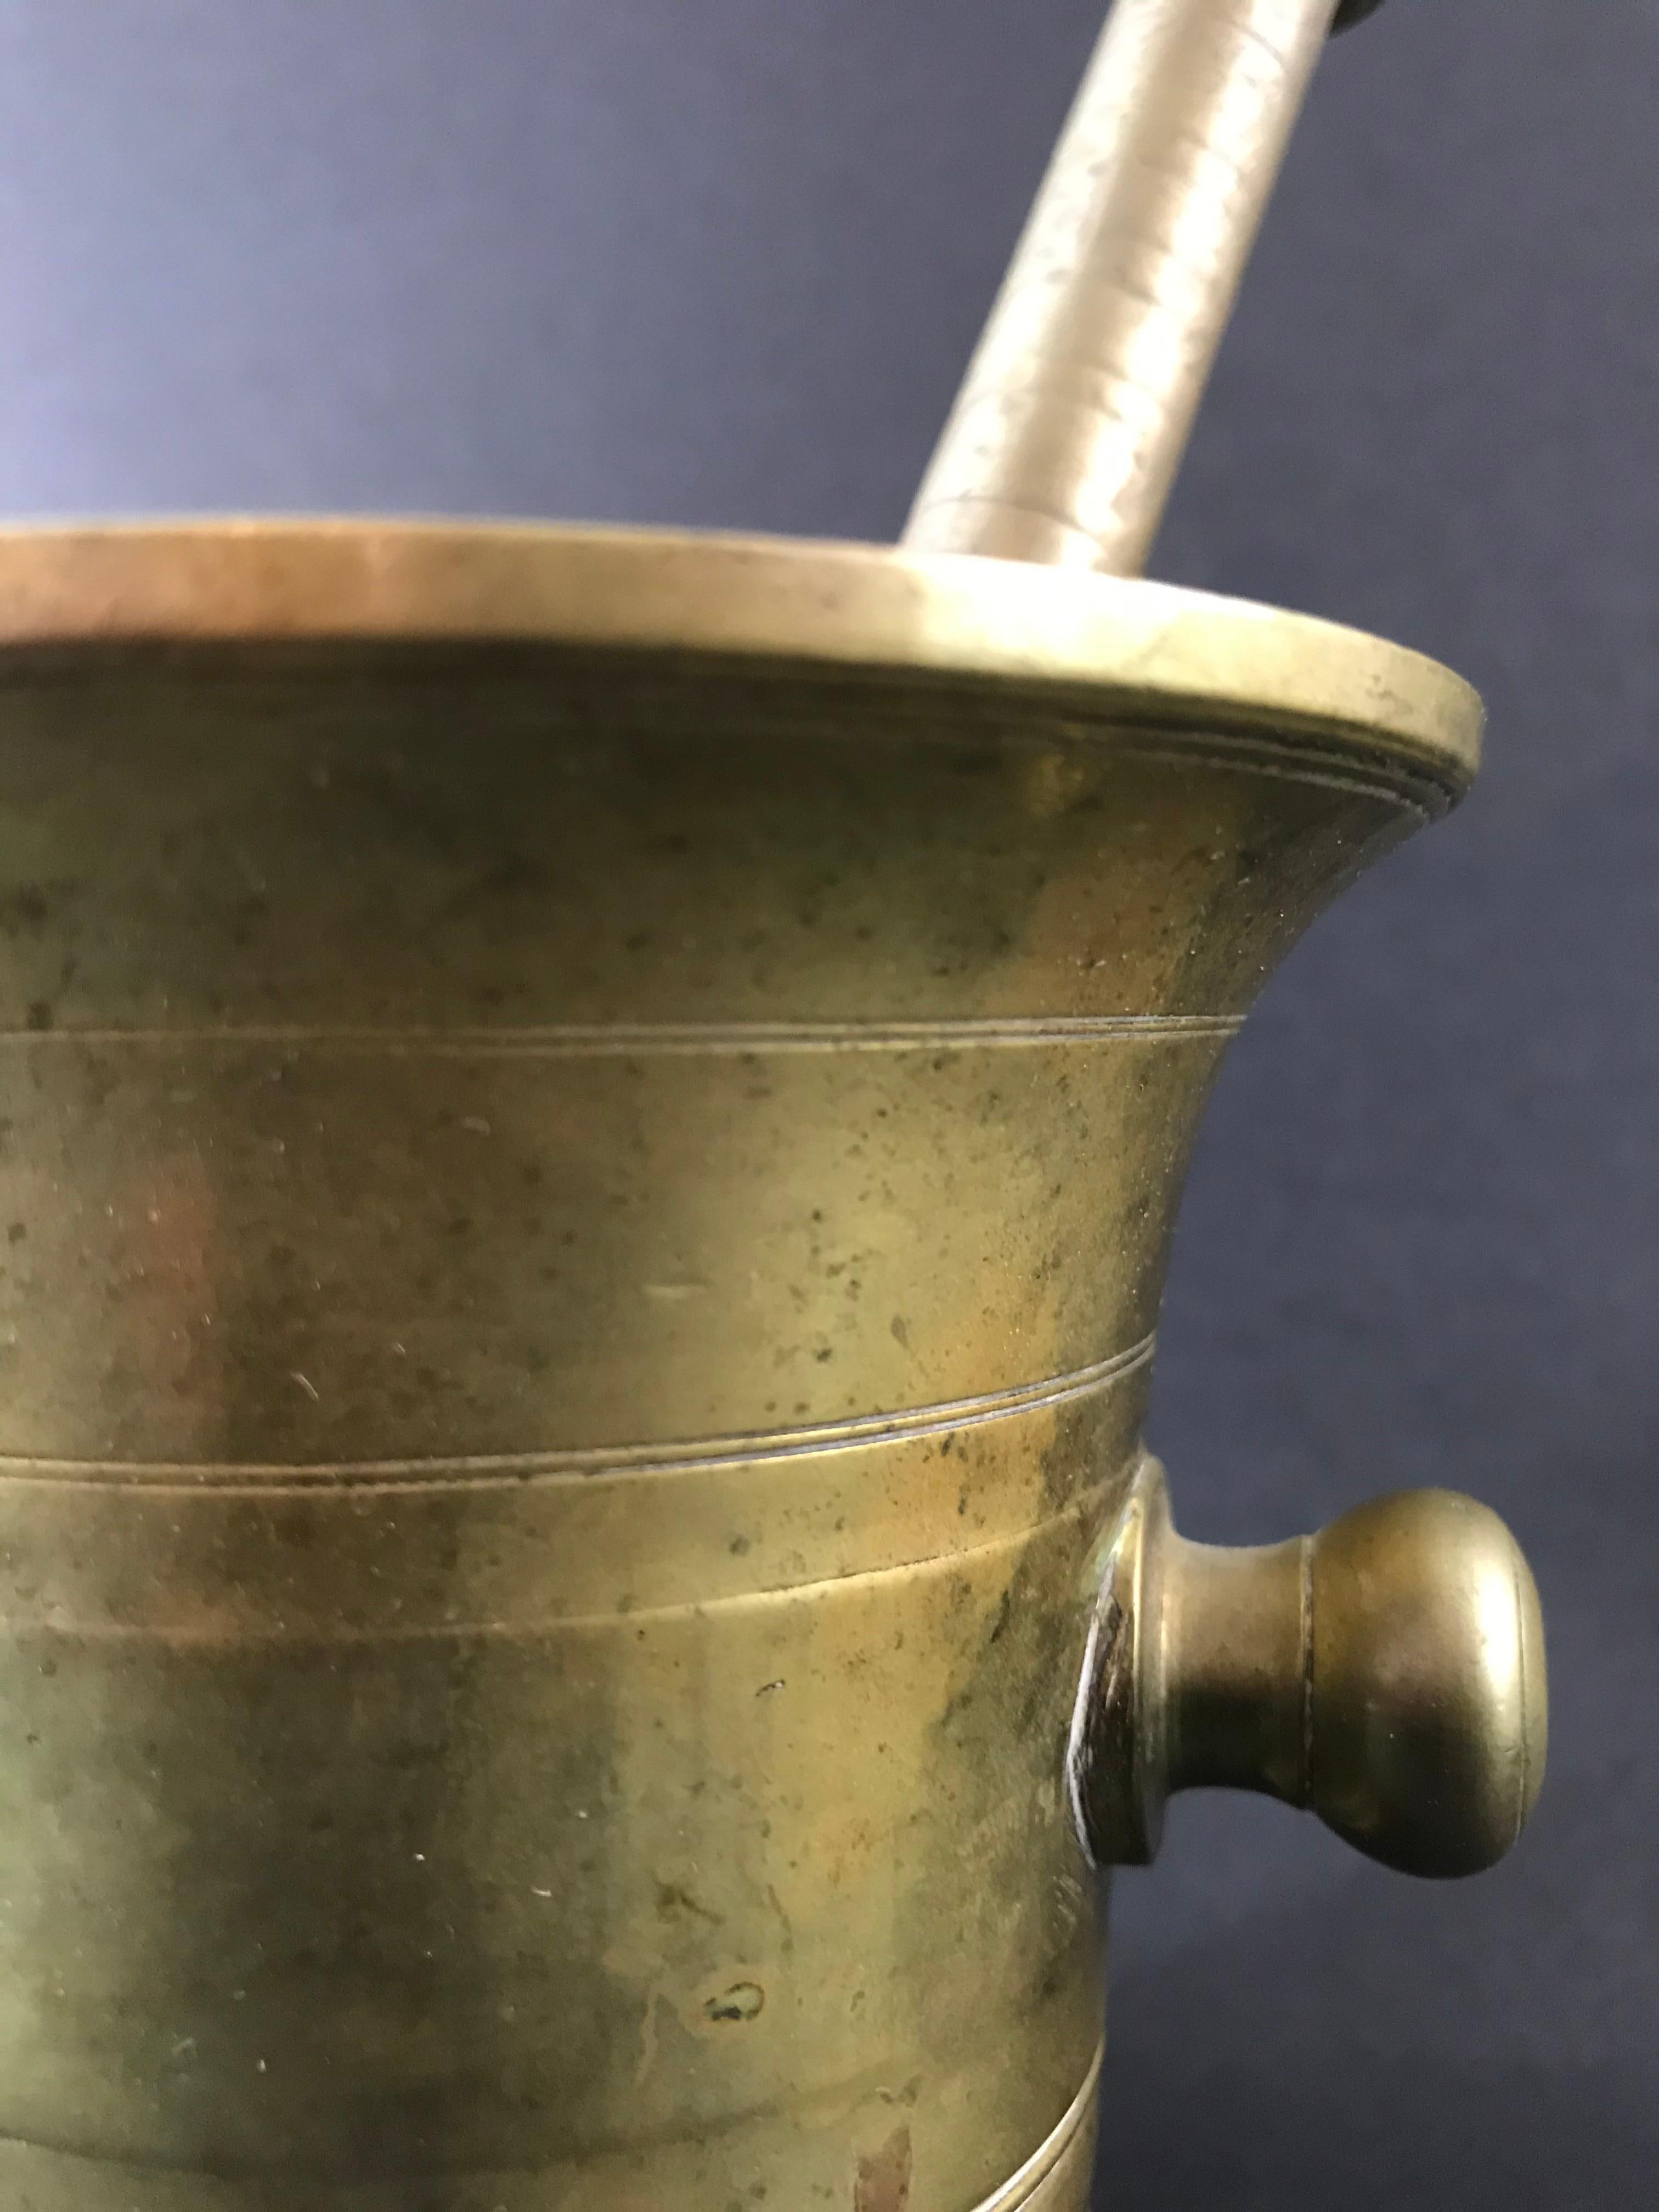 Bronze mortar and pestle.
17th or 18th century
Measures: Mortar height: 4 inches
Pestle height: 7.5 inches.